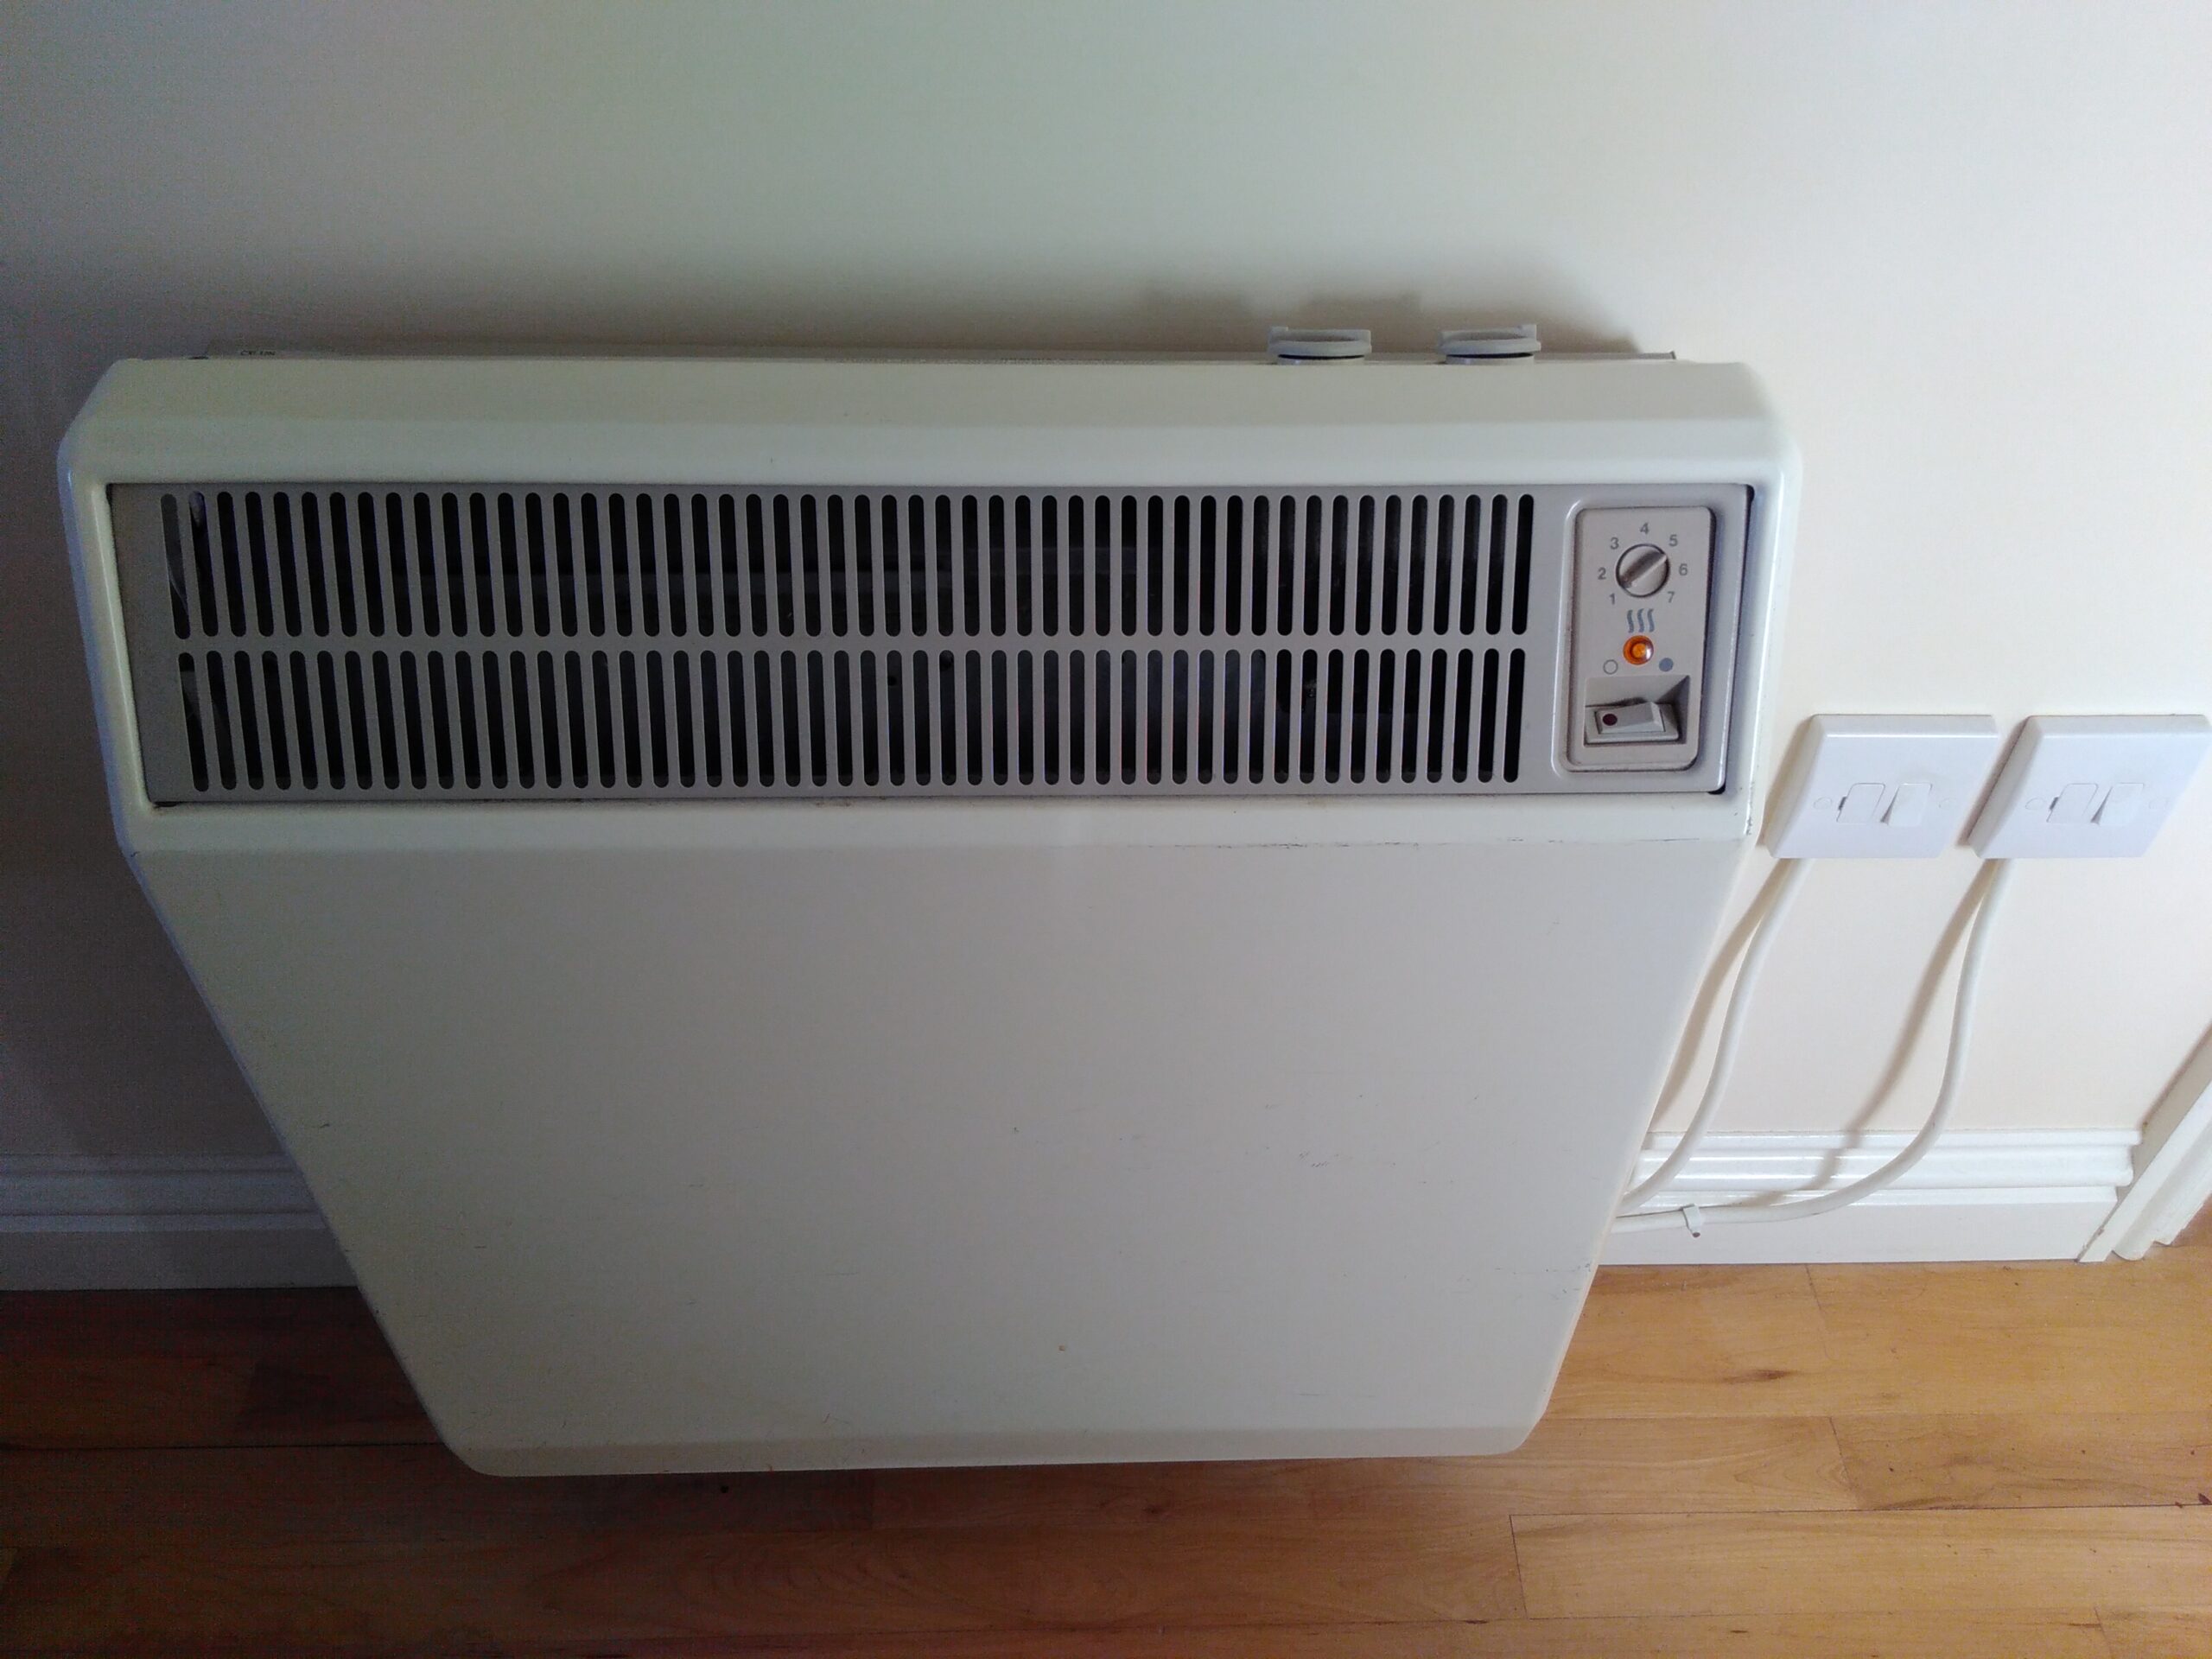 Storage heater with manual controls and two wall switches